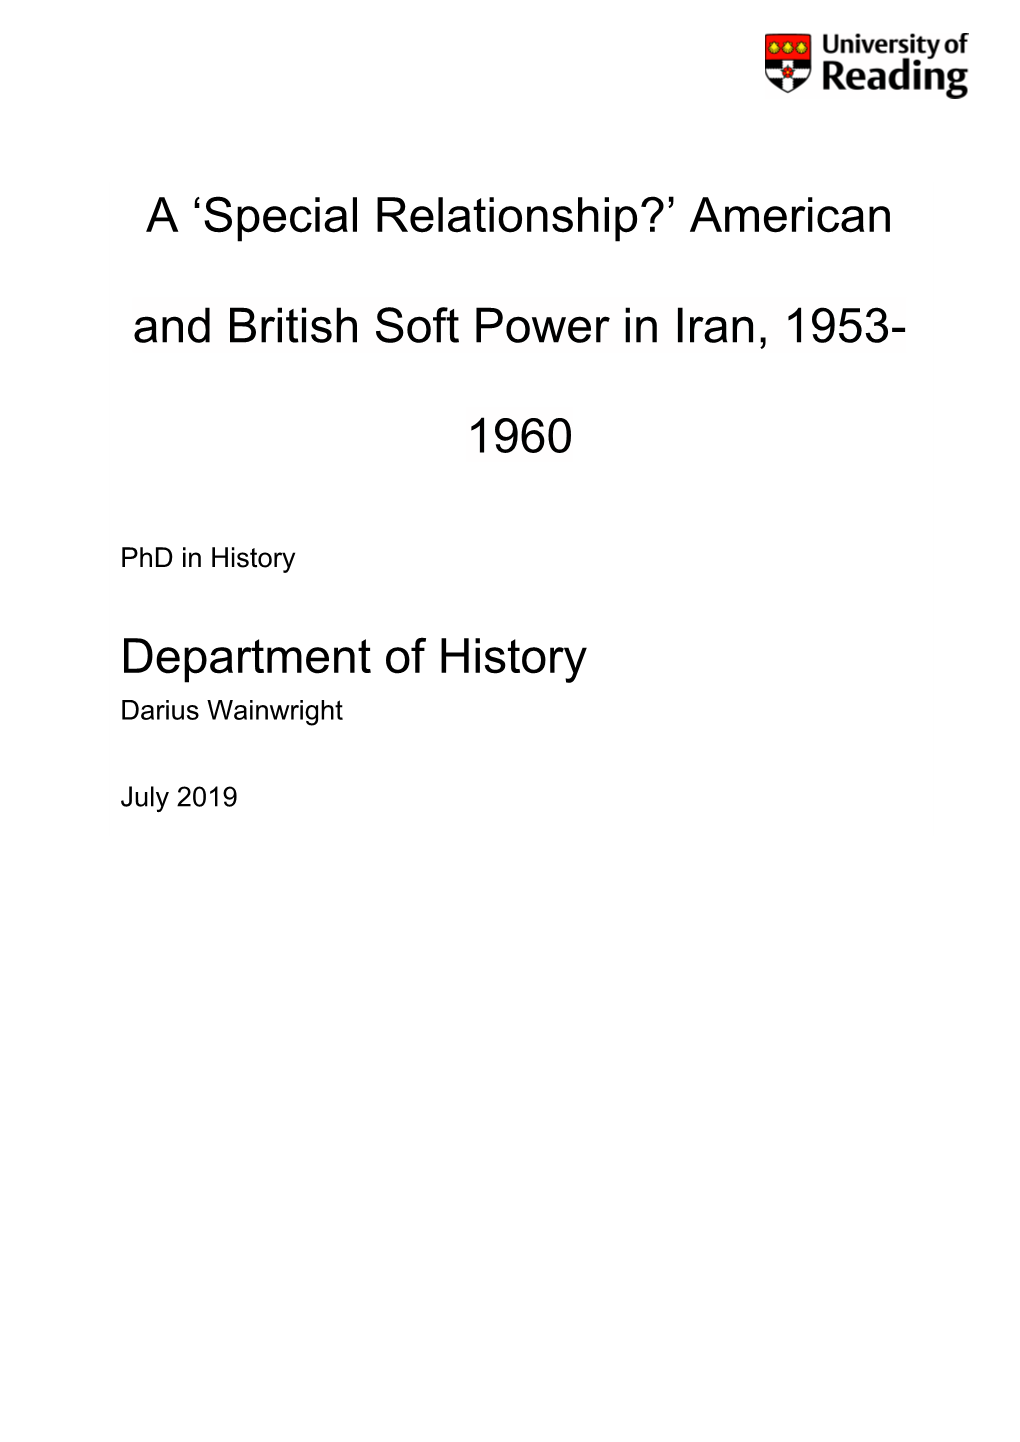 American and British Soft Power in Iran, 1953- 1960